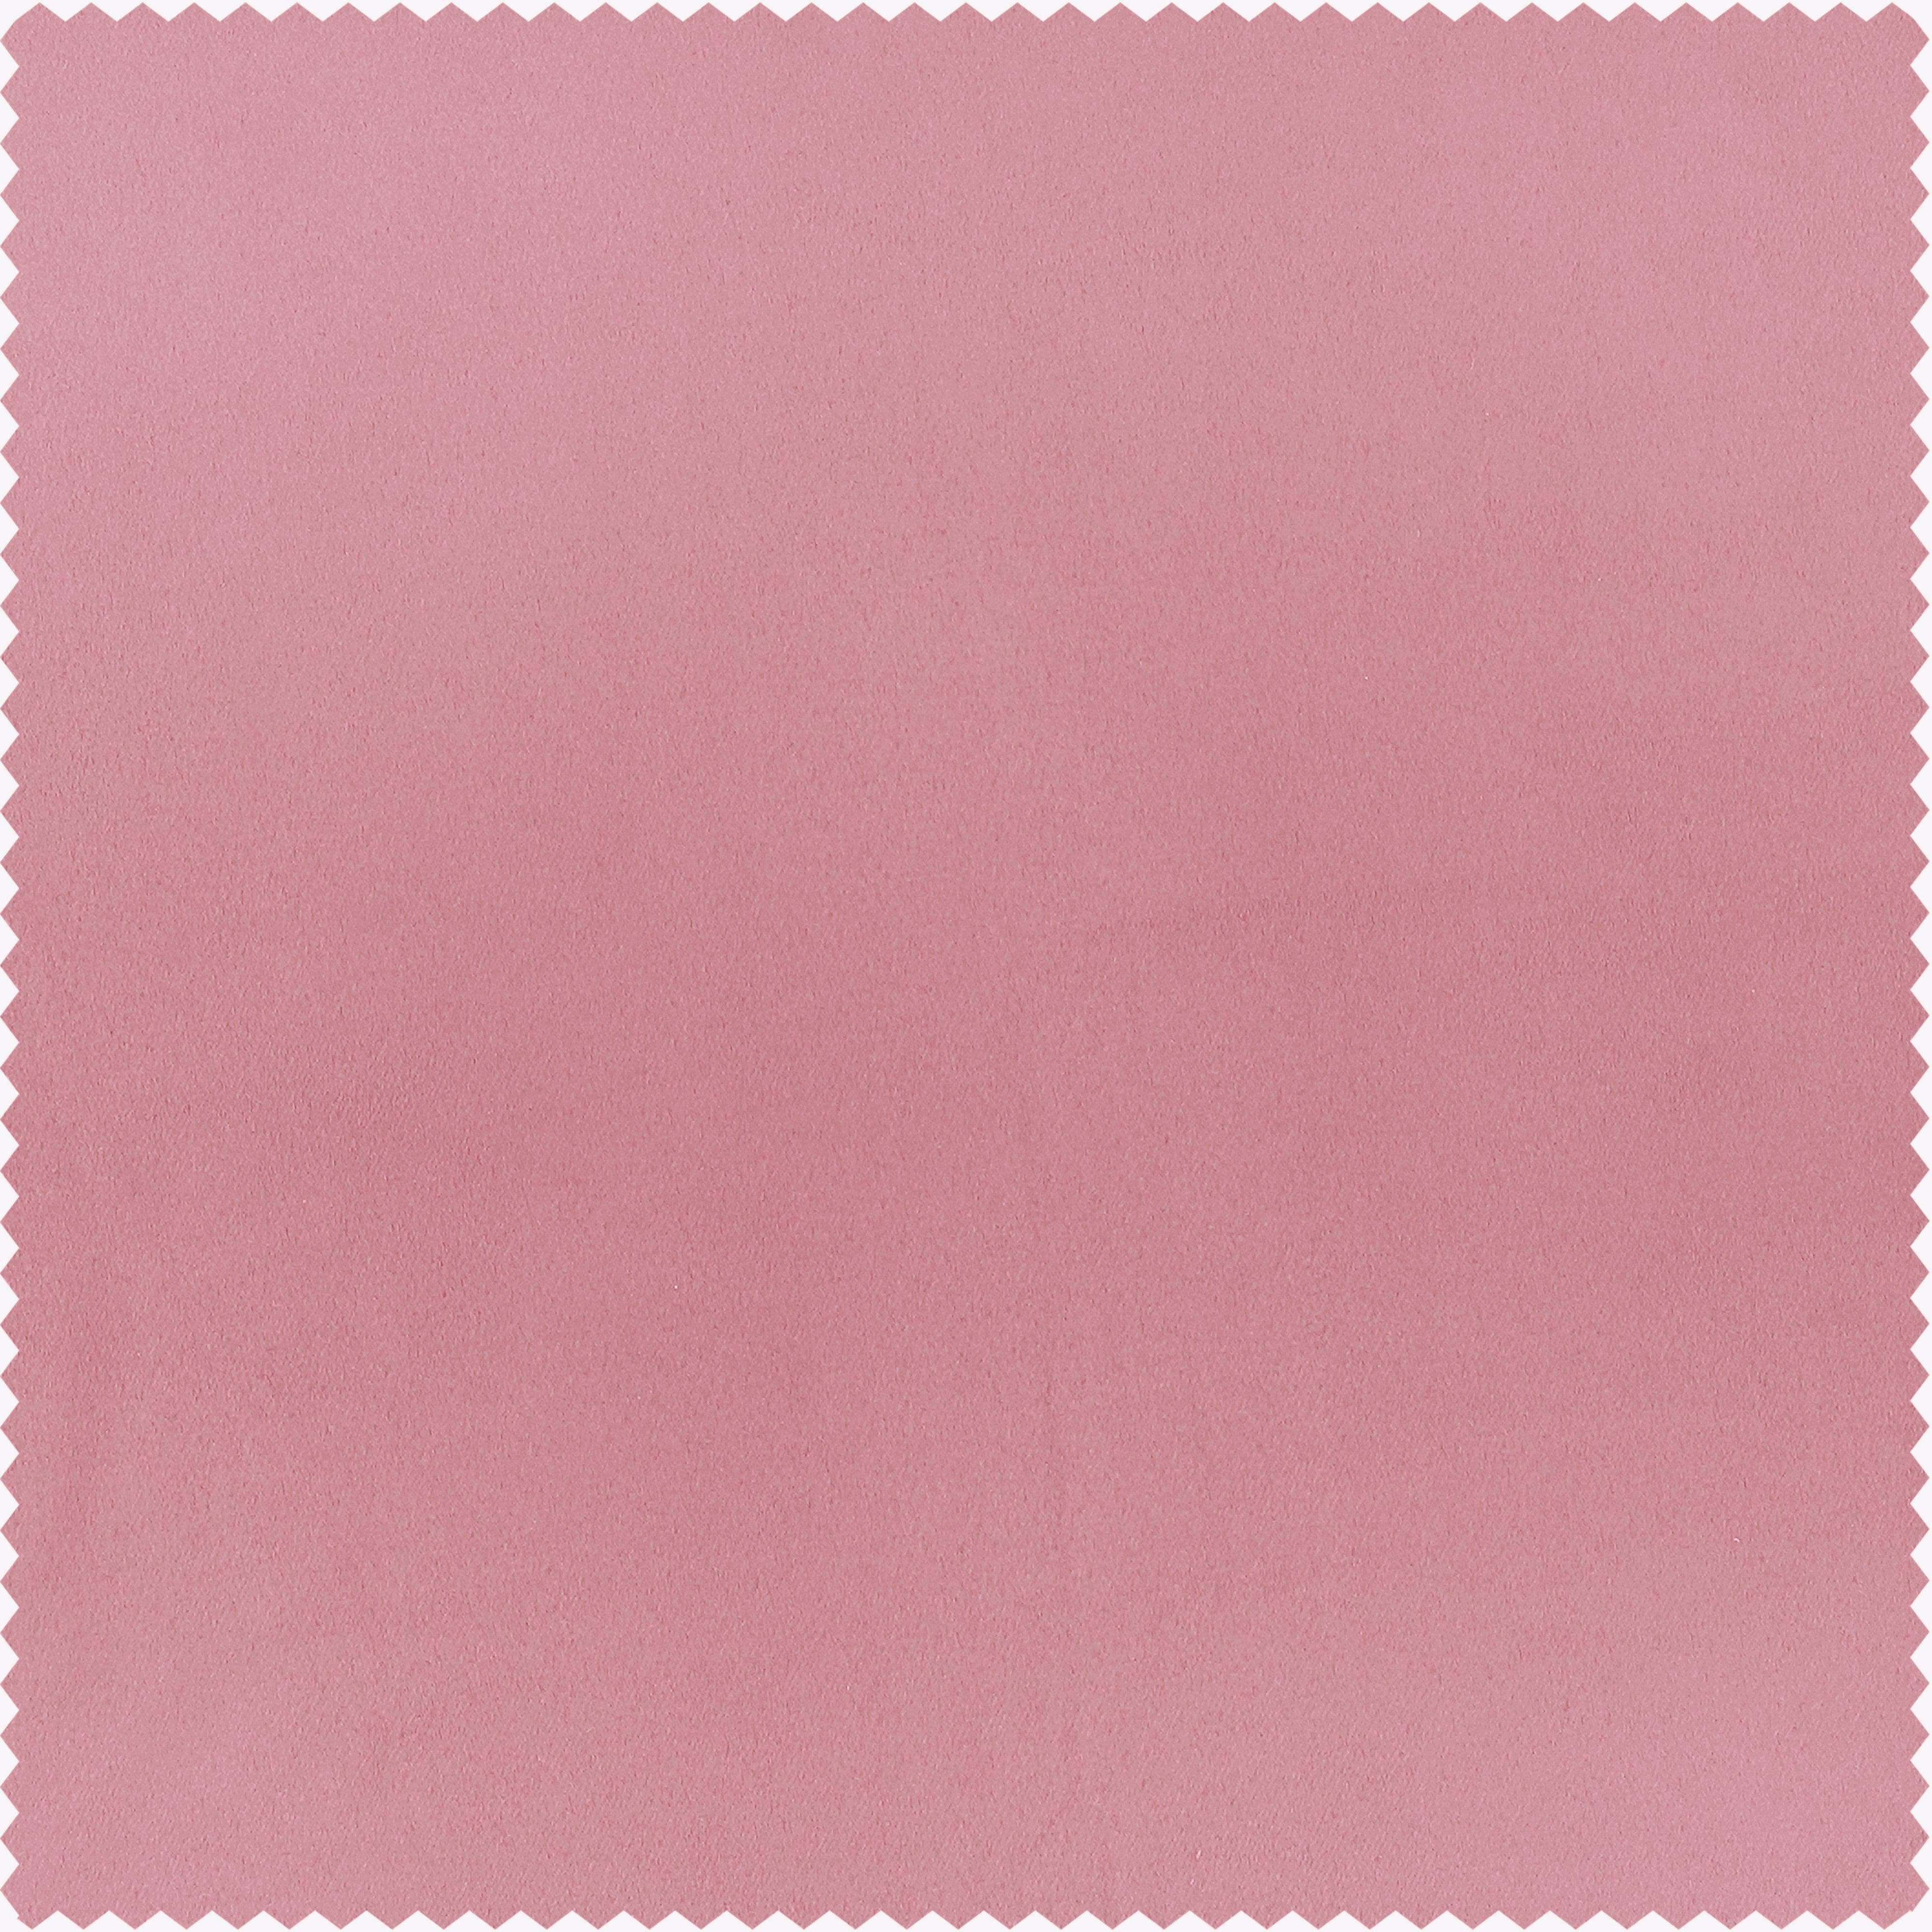 Precious Pink Solid Polyester Swatch